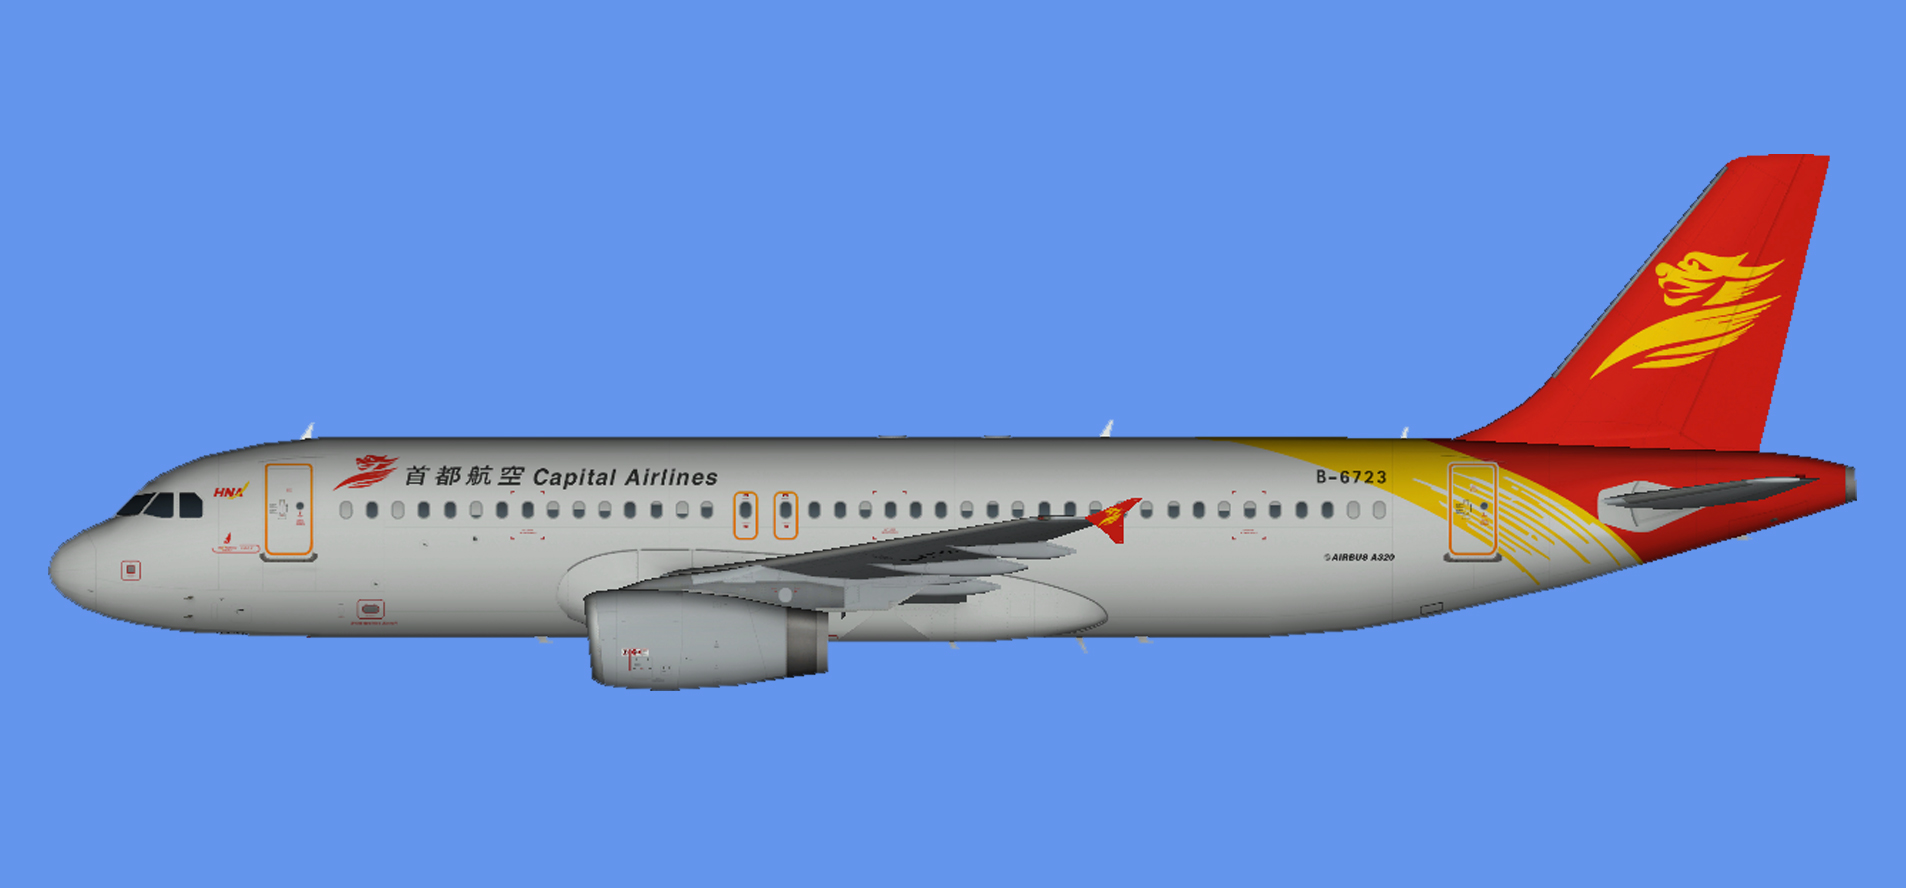 Capital Airlines Airbus A320 IAE